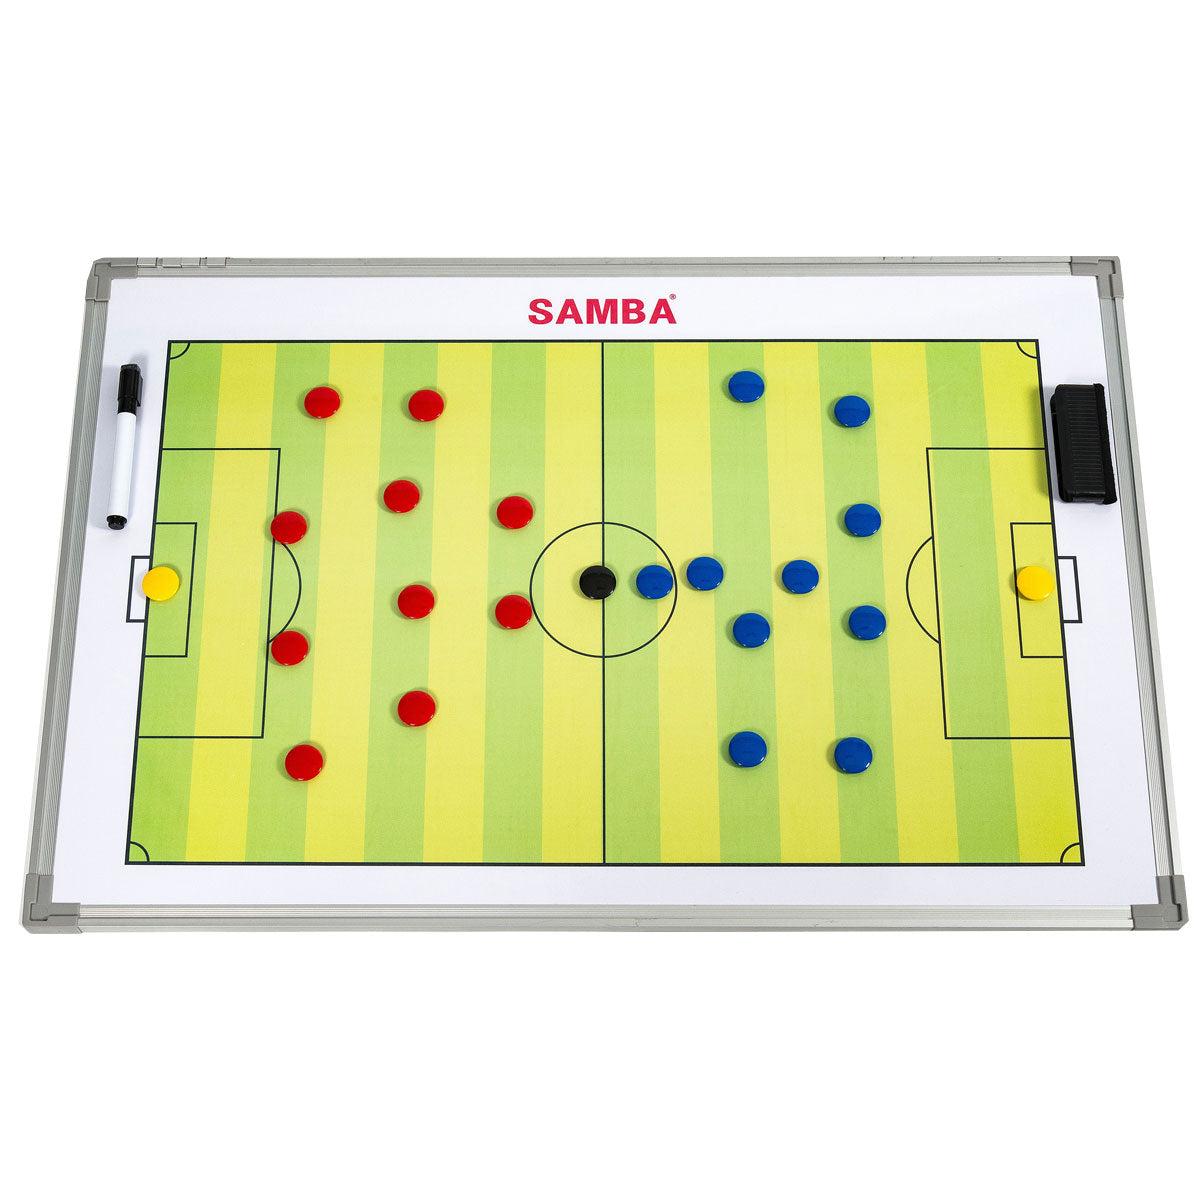 Samba Double Sided Tactic Board with bag - 90cm x 60cm